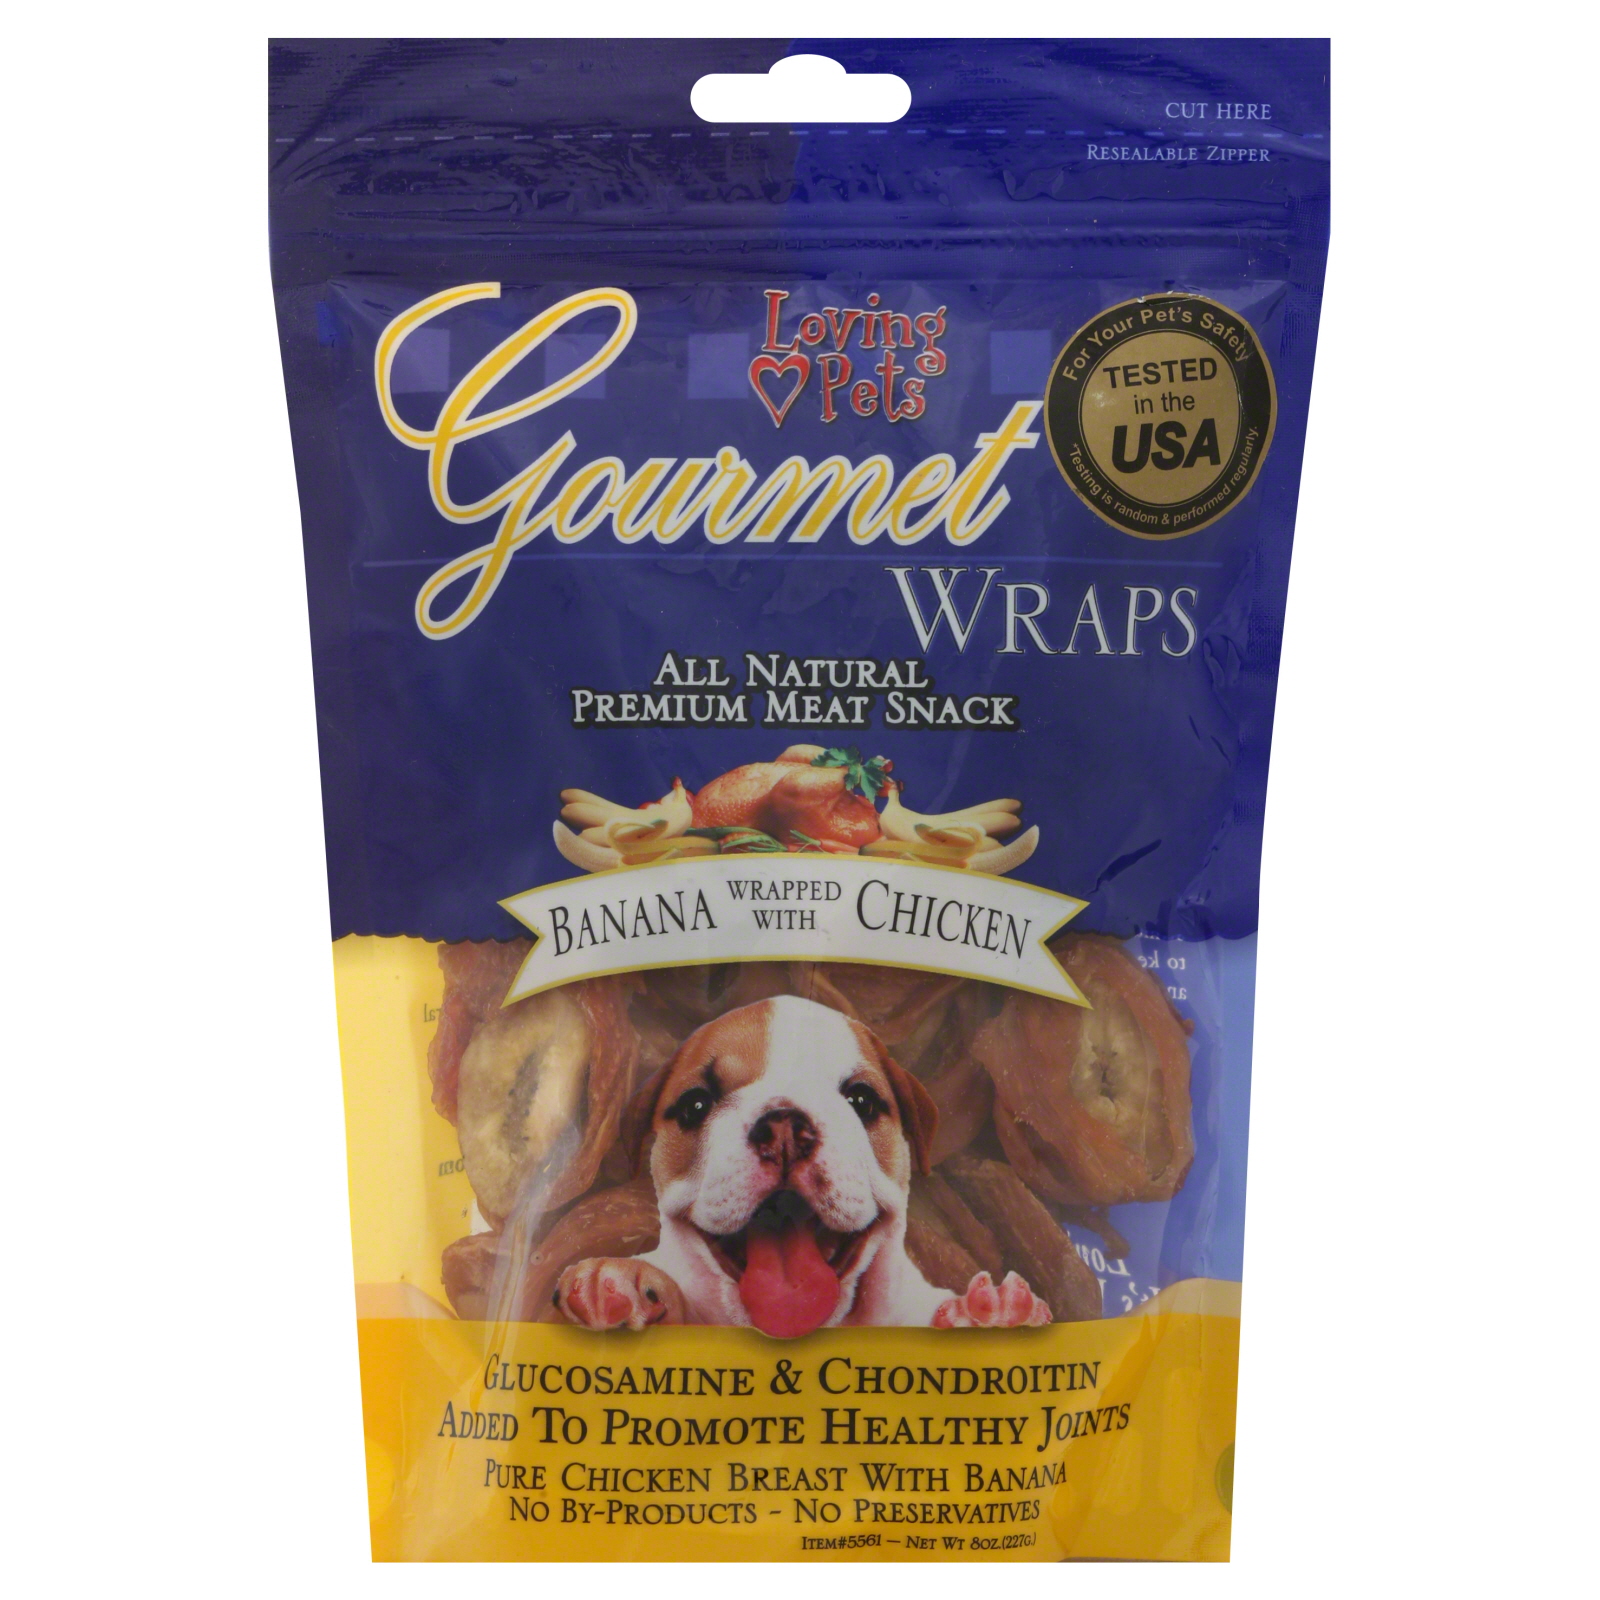 Loving Pets Gourmet All Natural Premium Meat Snack, Wraps, Banana Wrapped with Chicken, 8 oz (227 g)